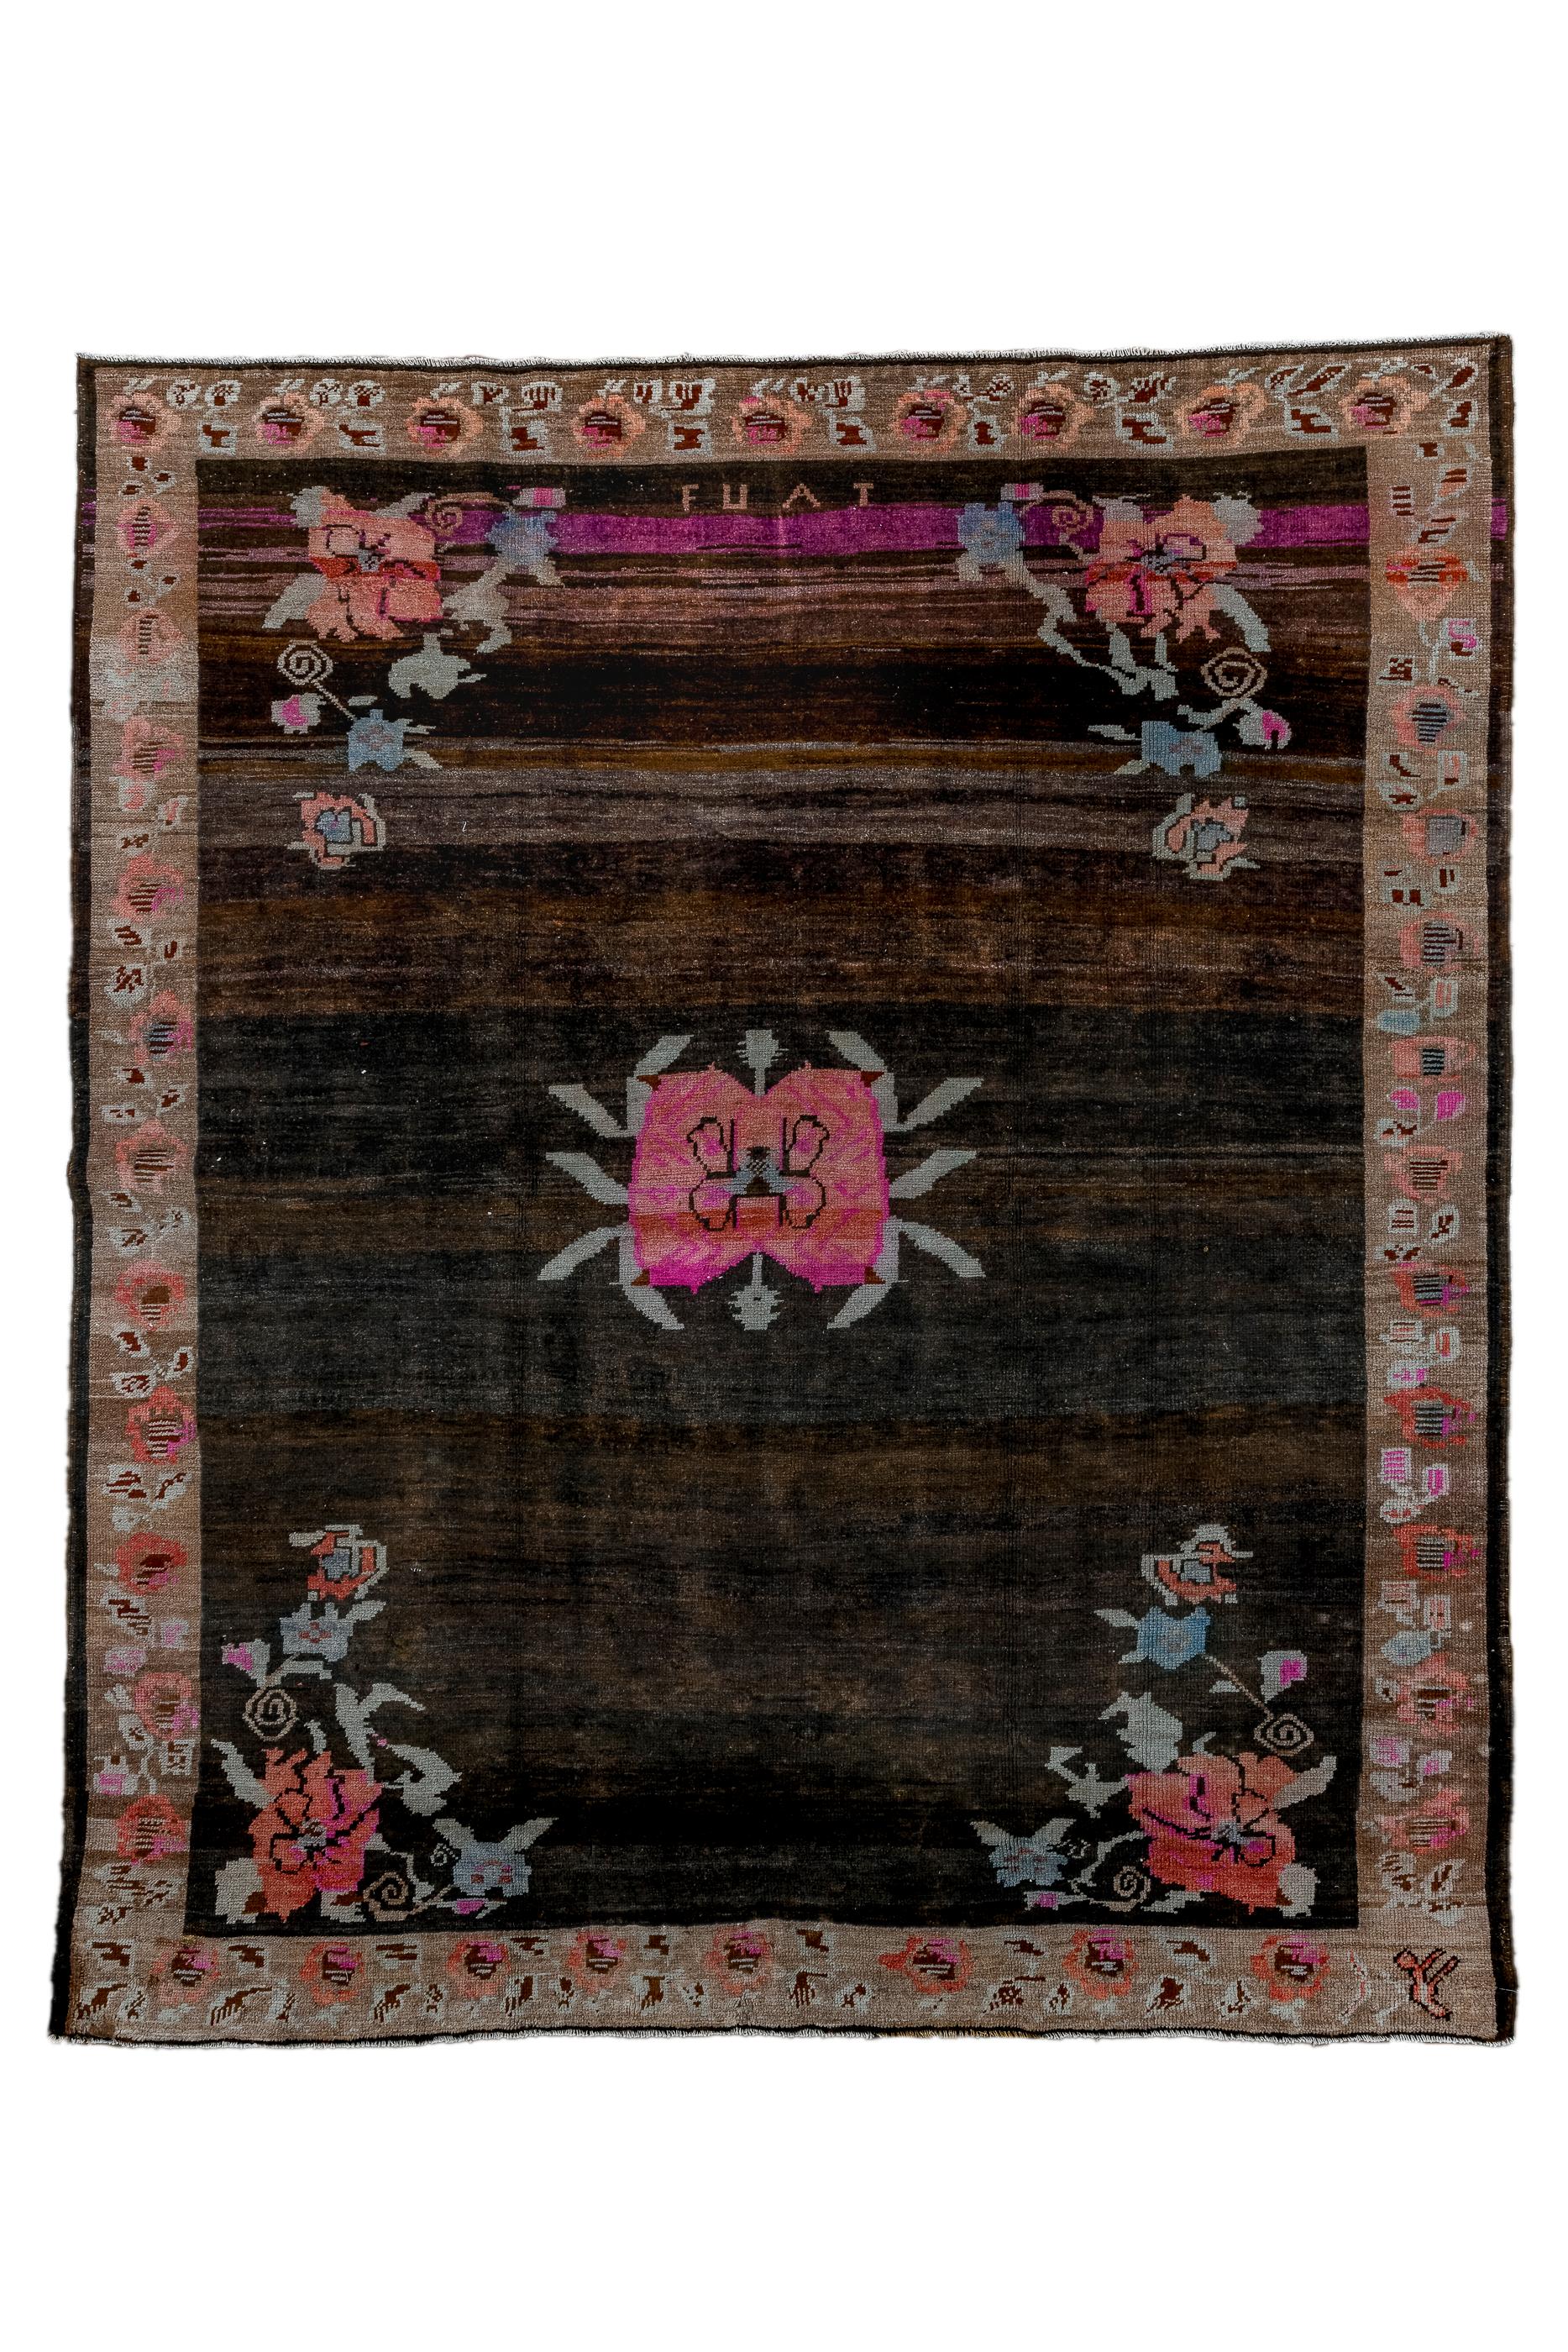 The abrashed, mostly open charcoal field displays a mostly pink, central, pinched medallion with ten leafy extenders and two tiny pendants, along with openwork flower assemblies in all four corners. Signed “Fuat”, presumably the master weaver. Green